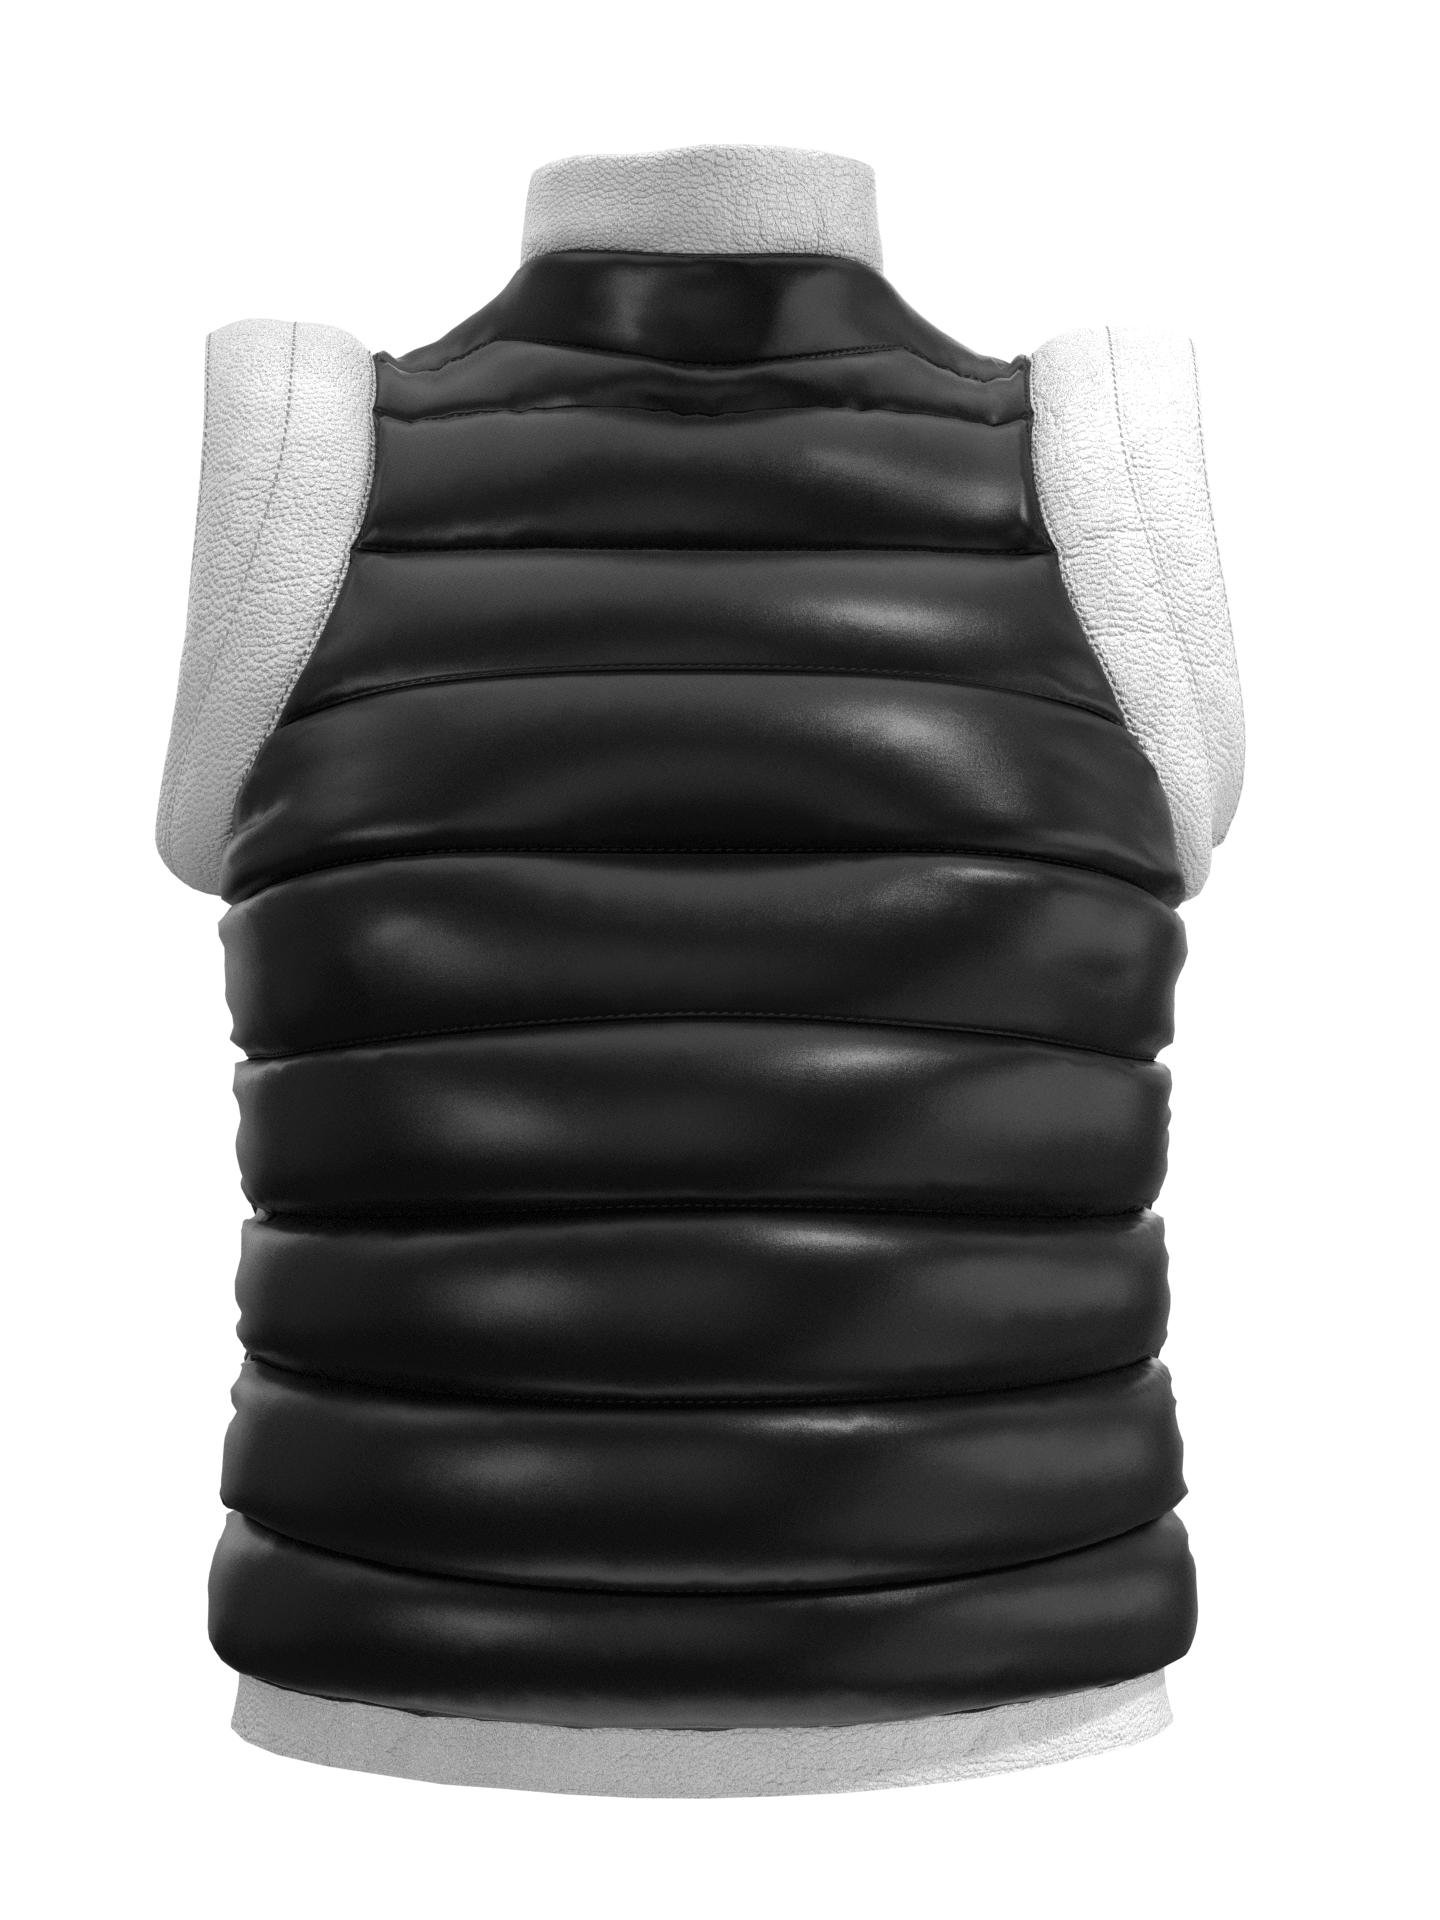 Puffer vest with shoulder detail by JULIAN WEISE